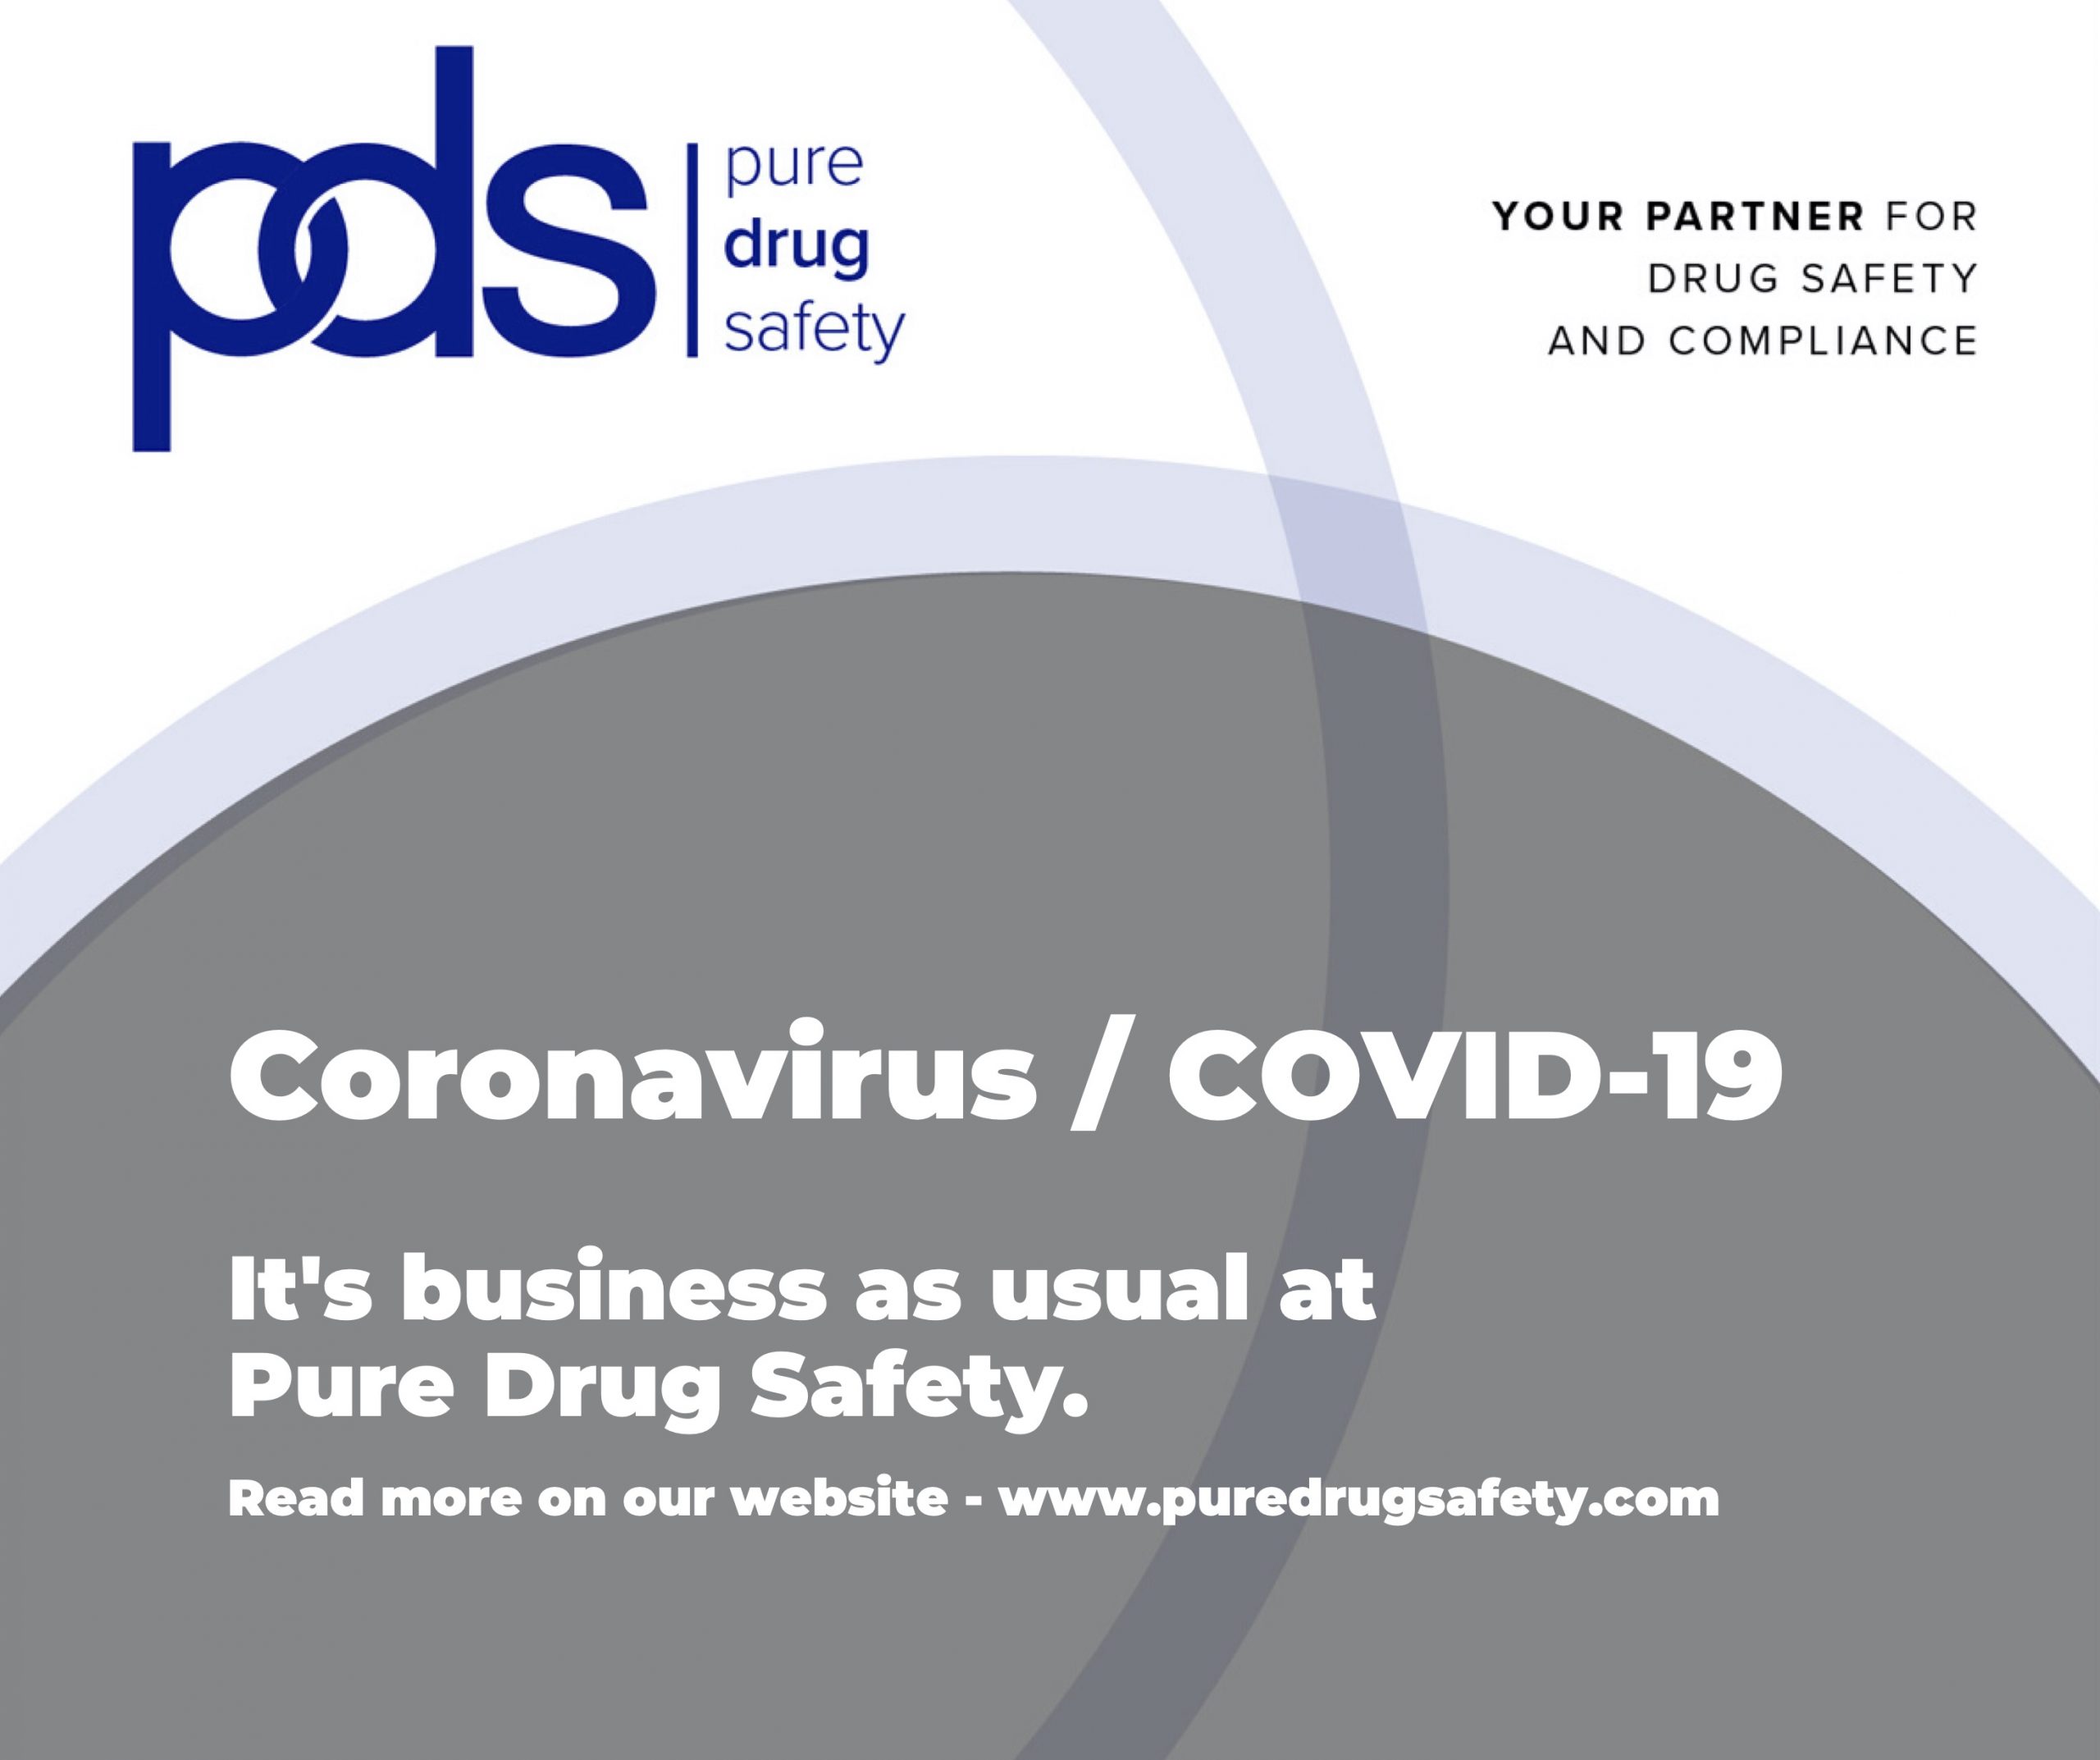 It's business as usual at PDS during the coronavirus / COVID-19 crisis